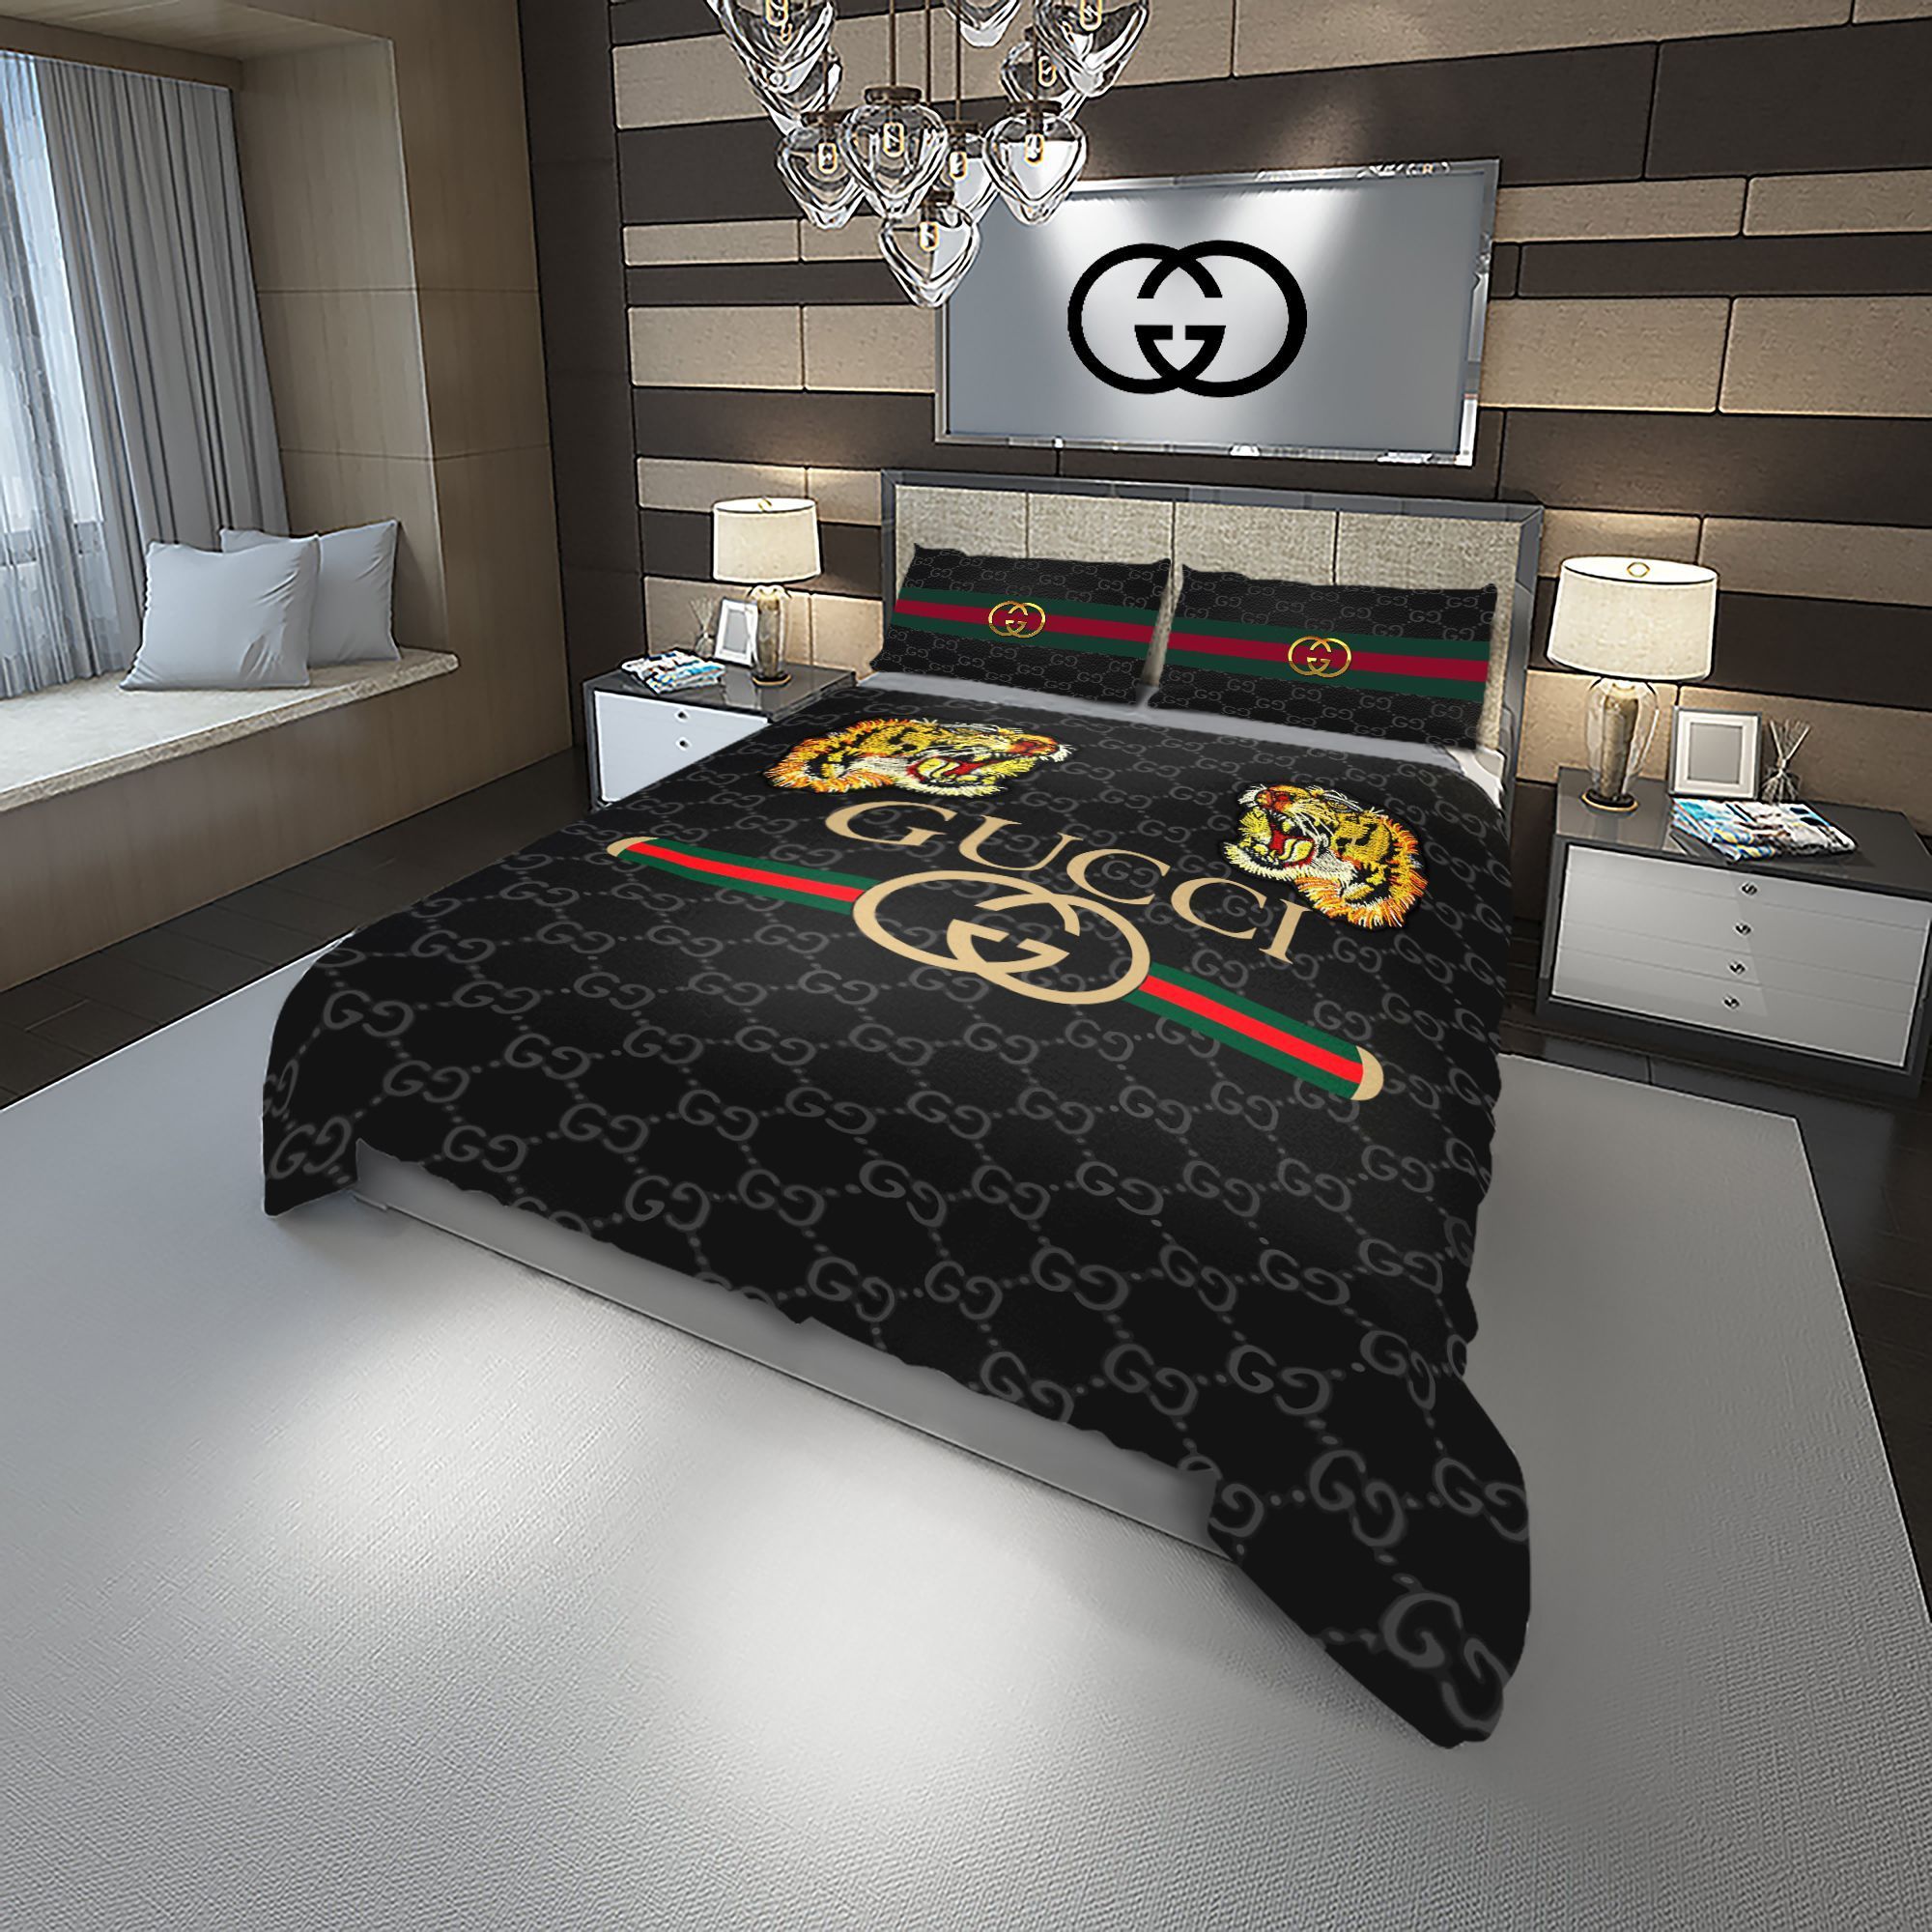 Let me show you about some luxury brand bedding set 2022 66